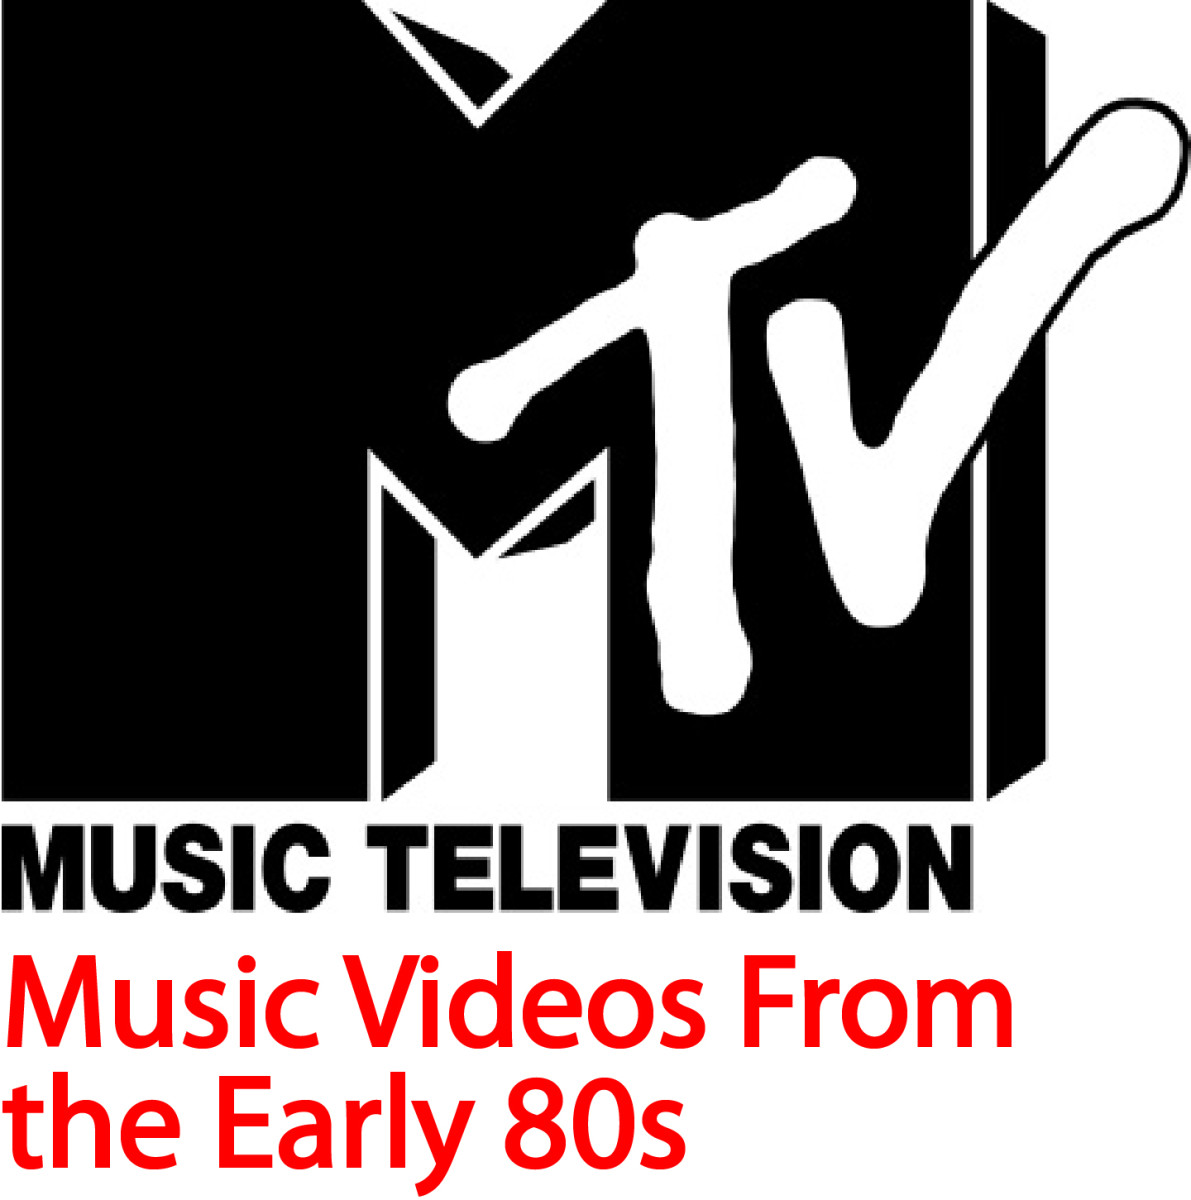 mtv-music-videos-they-played-in-the-early-80s